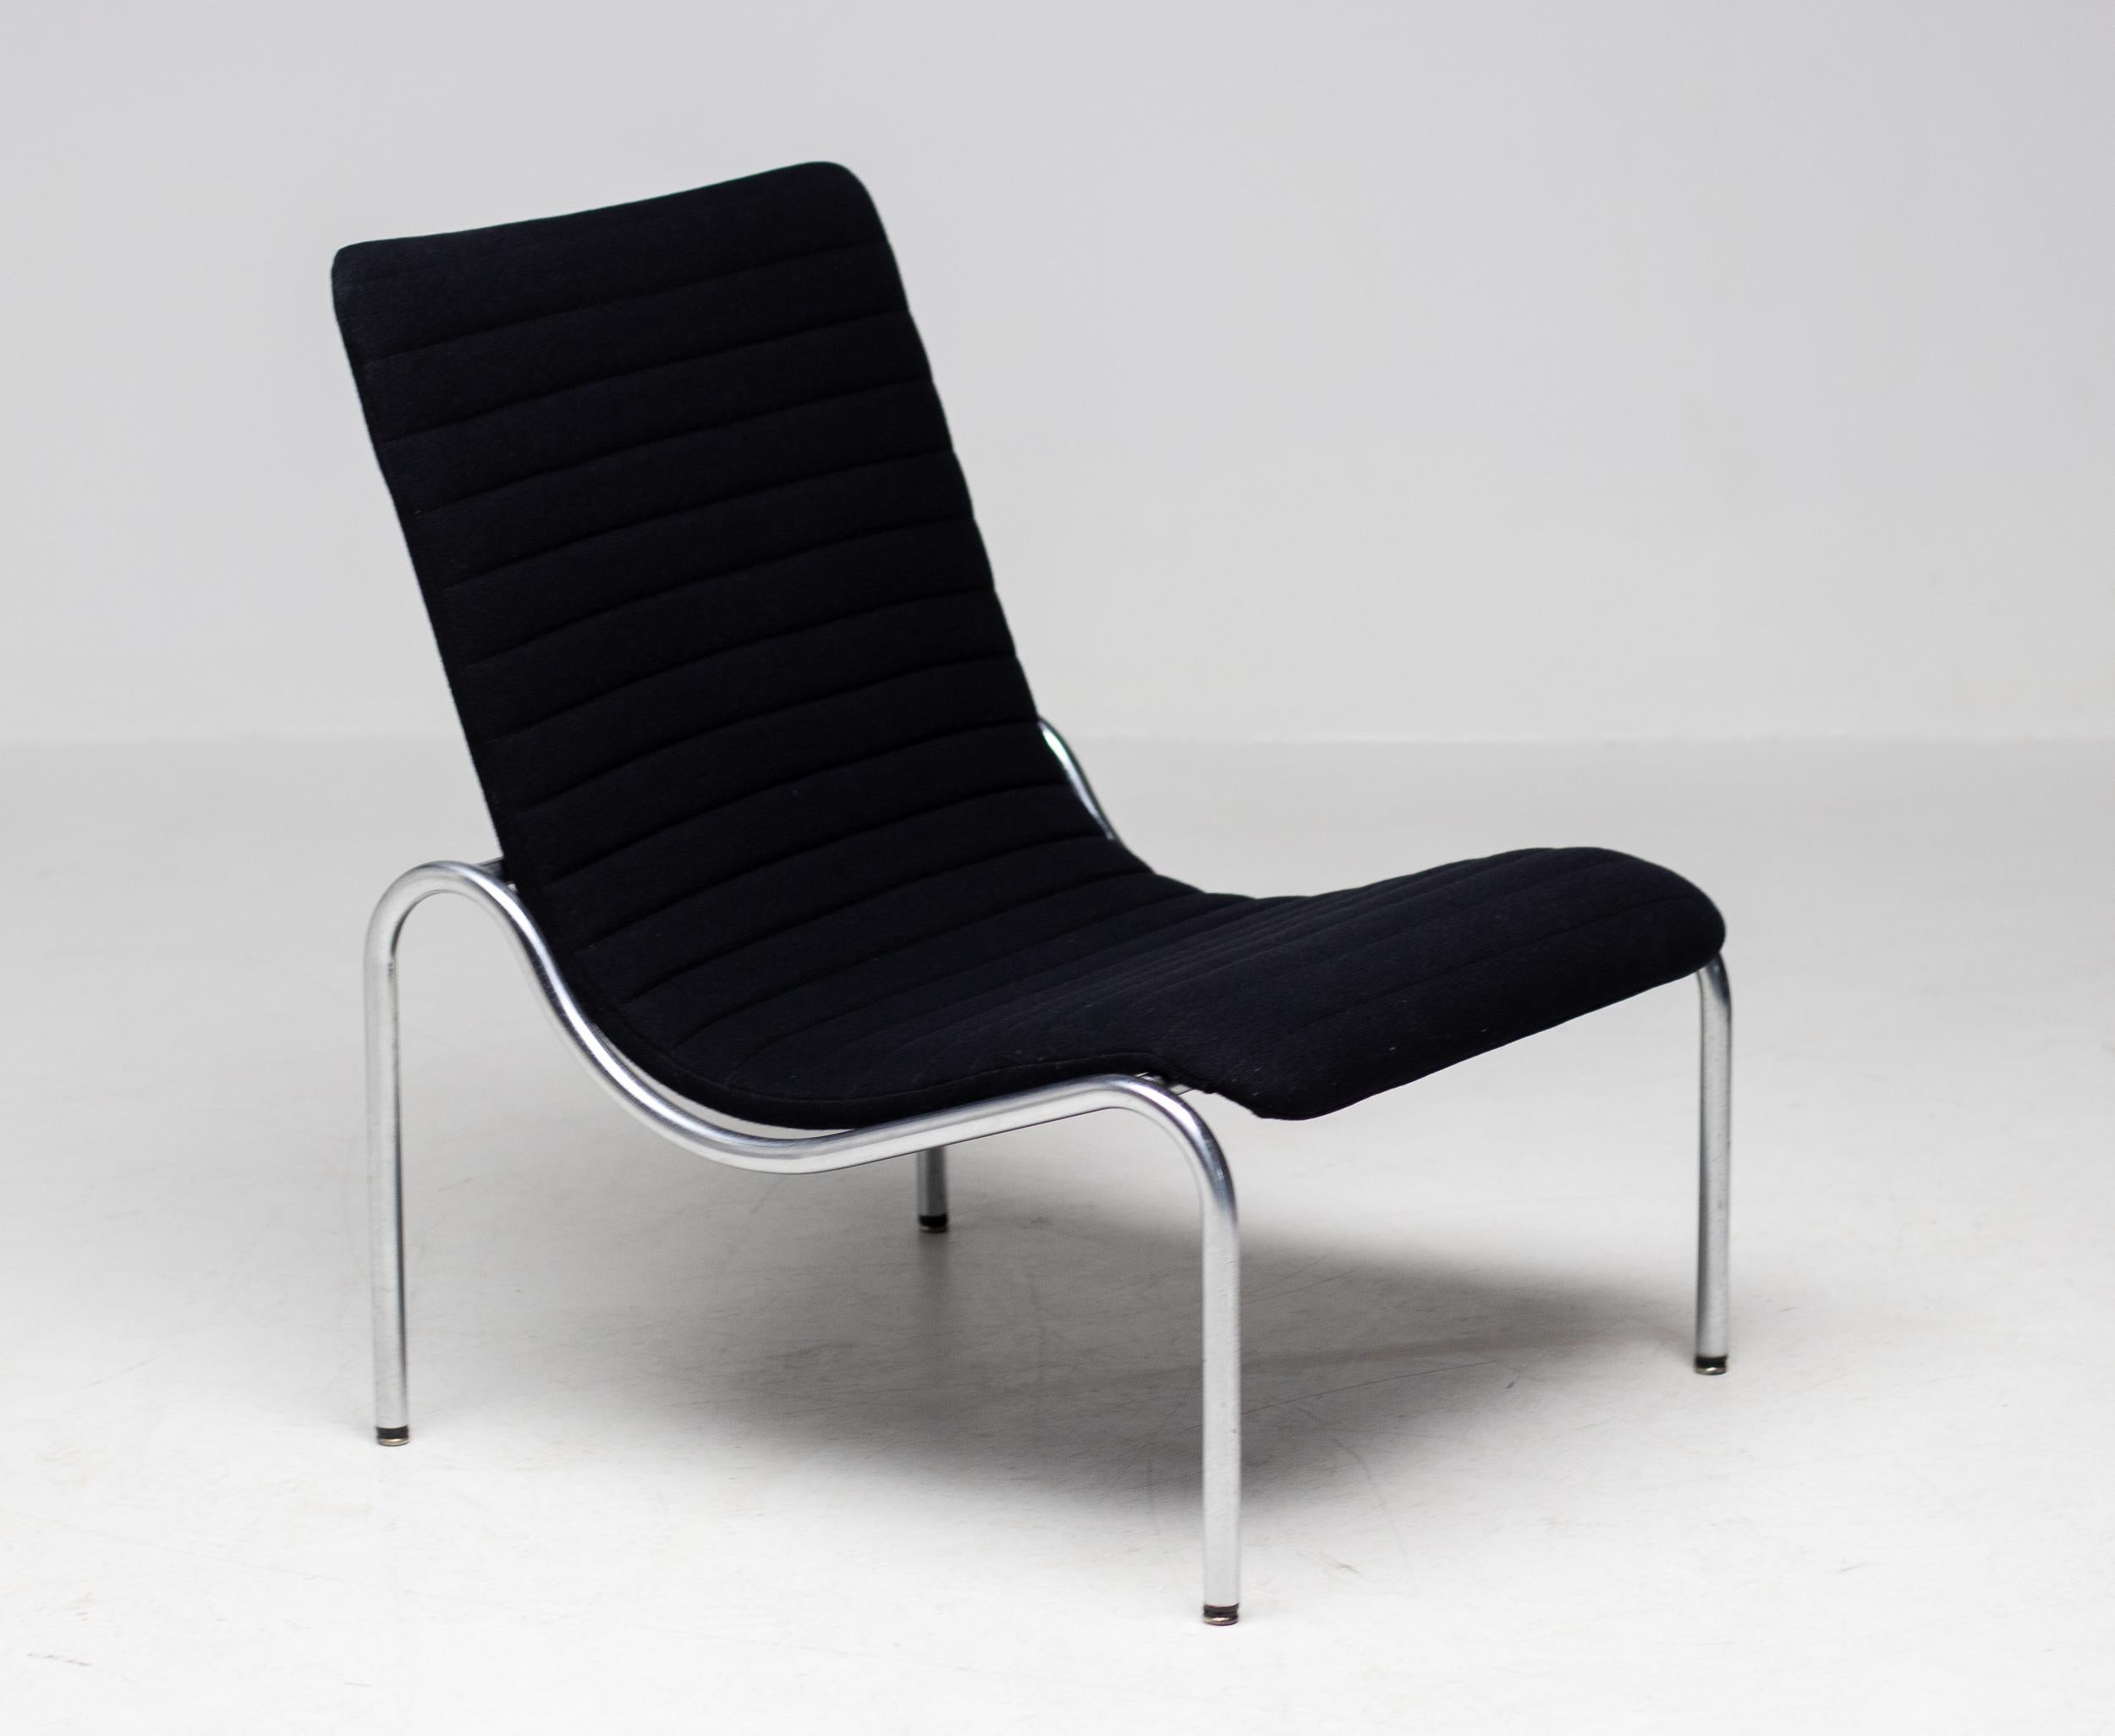 Set of 3 lounge chairs No. 704 designed by Kho Liang Ie for Stabin Woerden, the Netherlands.
Elegant and very comfortable Minimalist design by the Dutch modernist master. 
Beautiful matte chrome frame with black Hopsak upholstery.
This wonderful